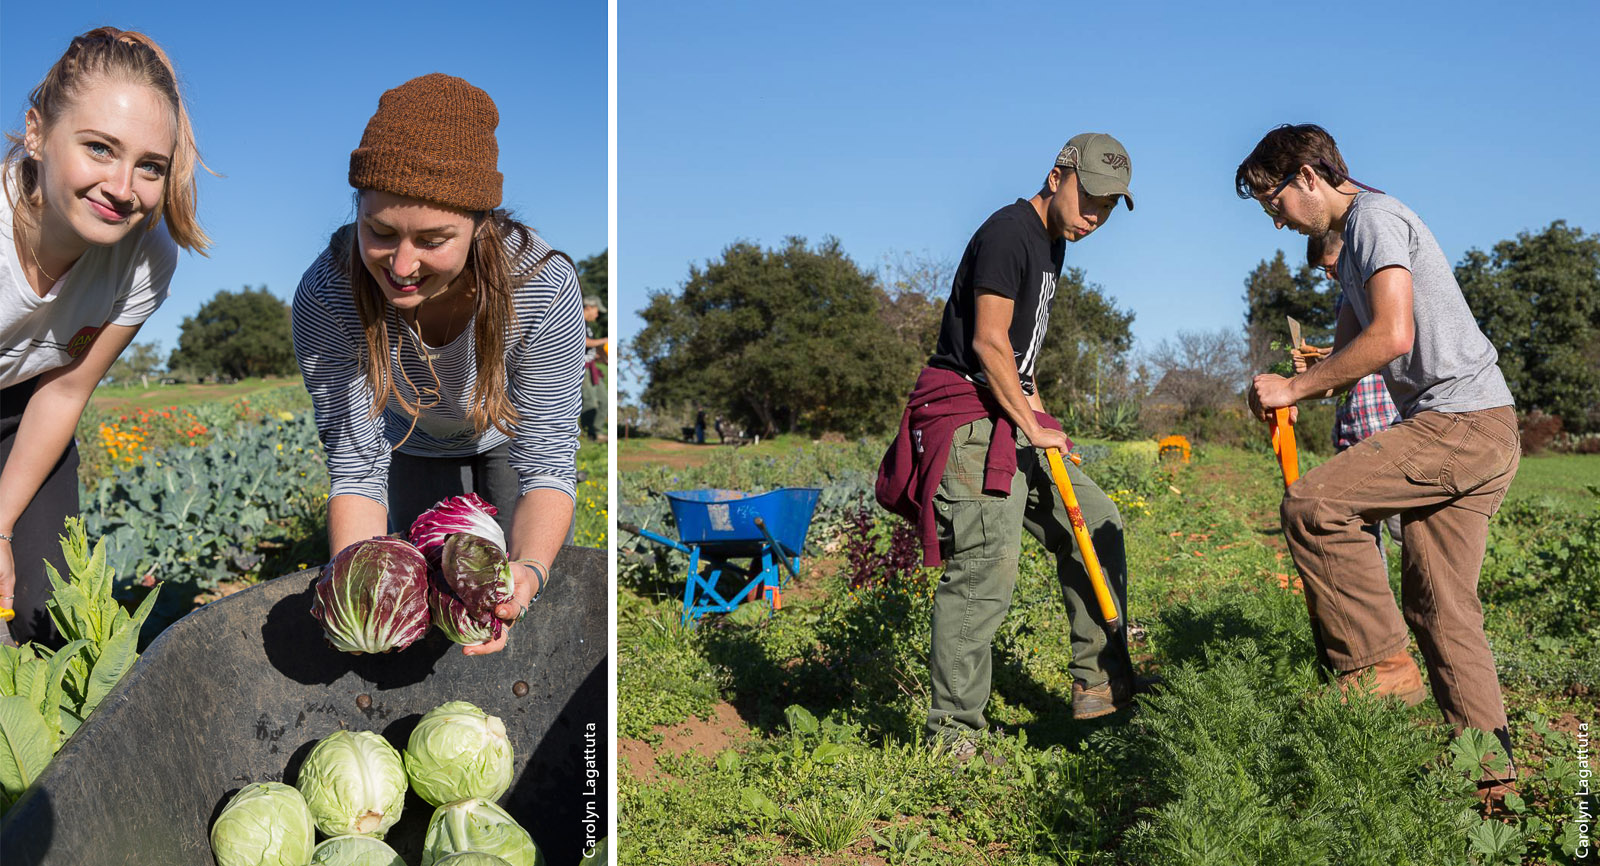 Student staff members and interns harvest produce at the UC Santa Cruz Center for Agroecology and Sustainable Food Systems farm.